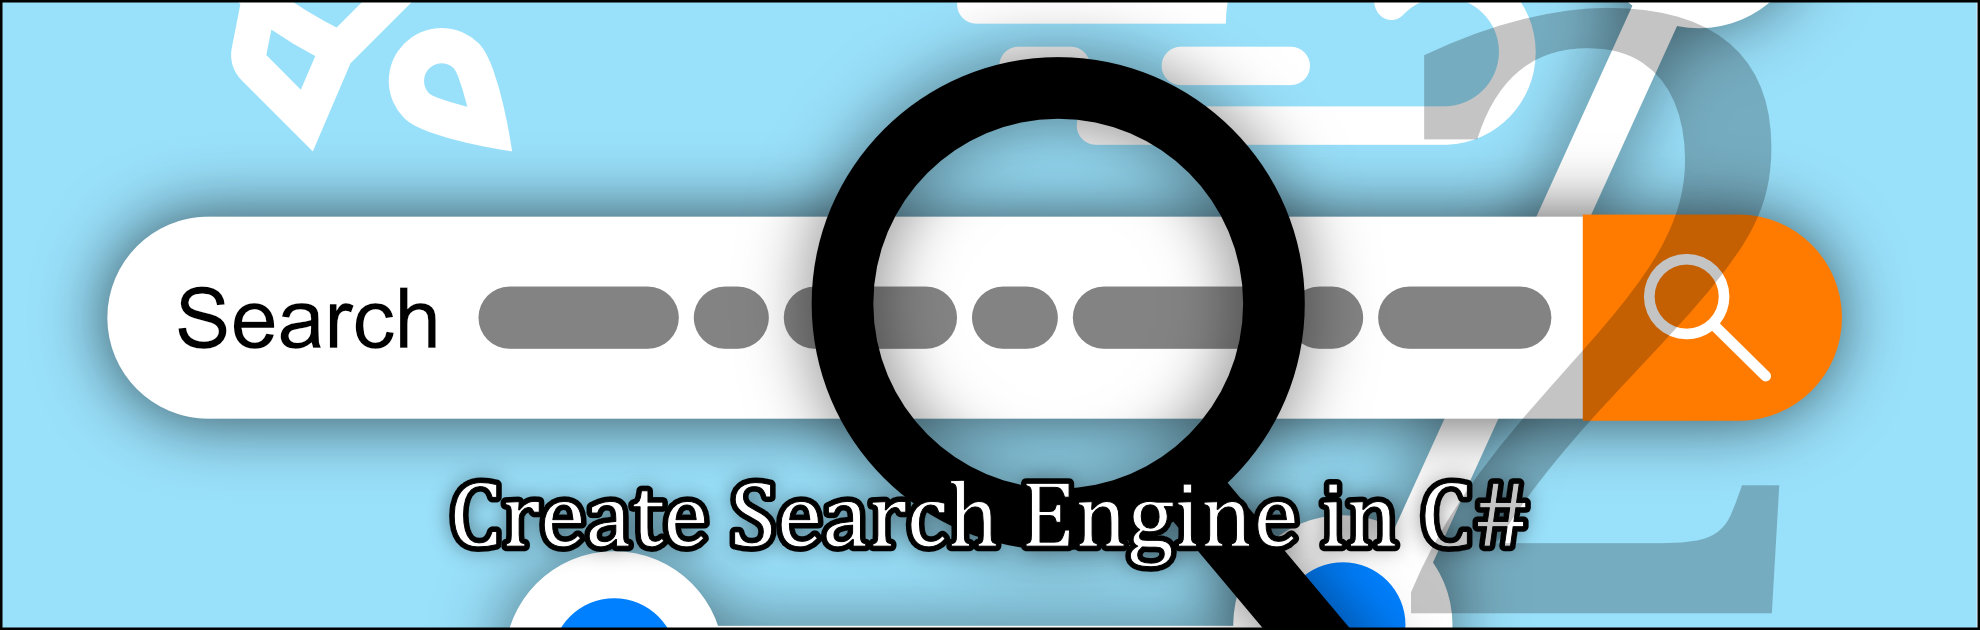 Search Engine in C#